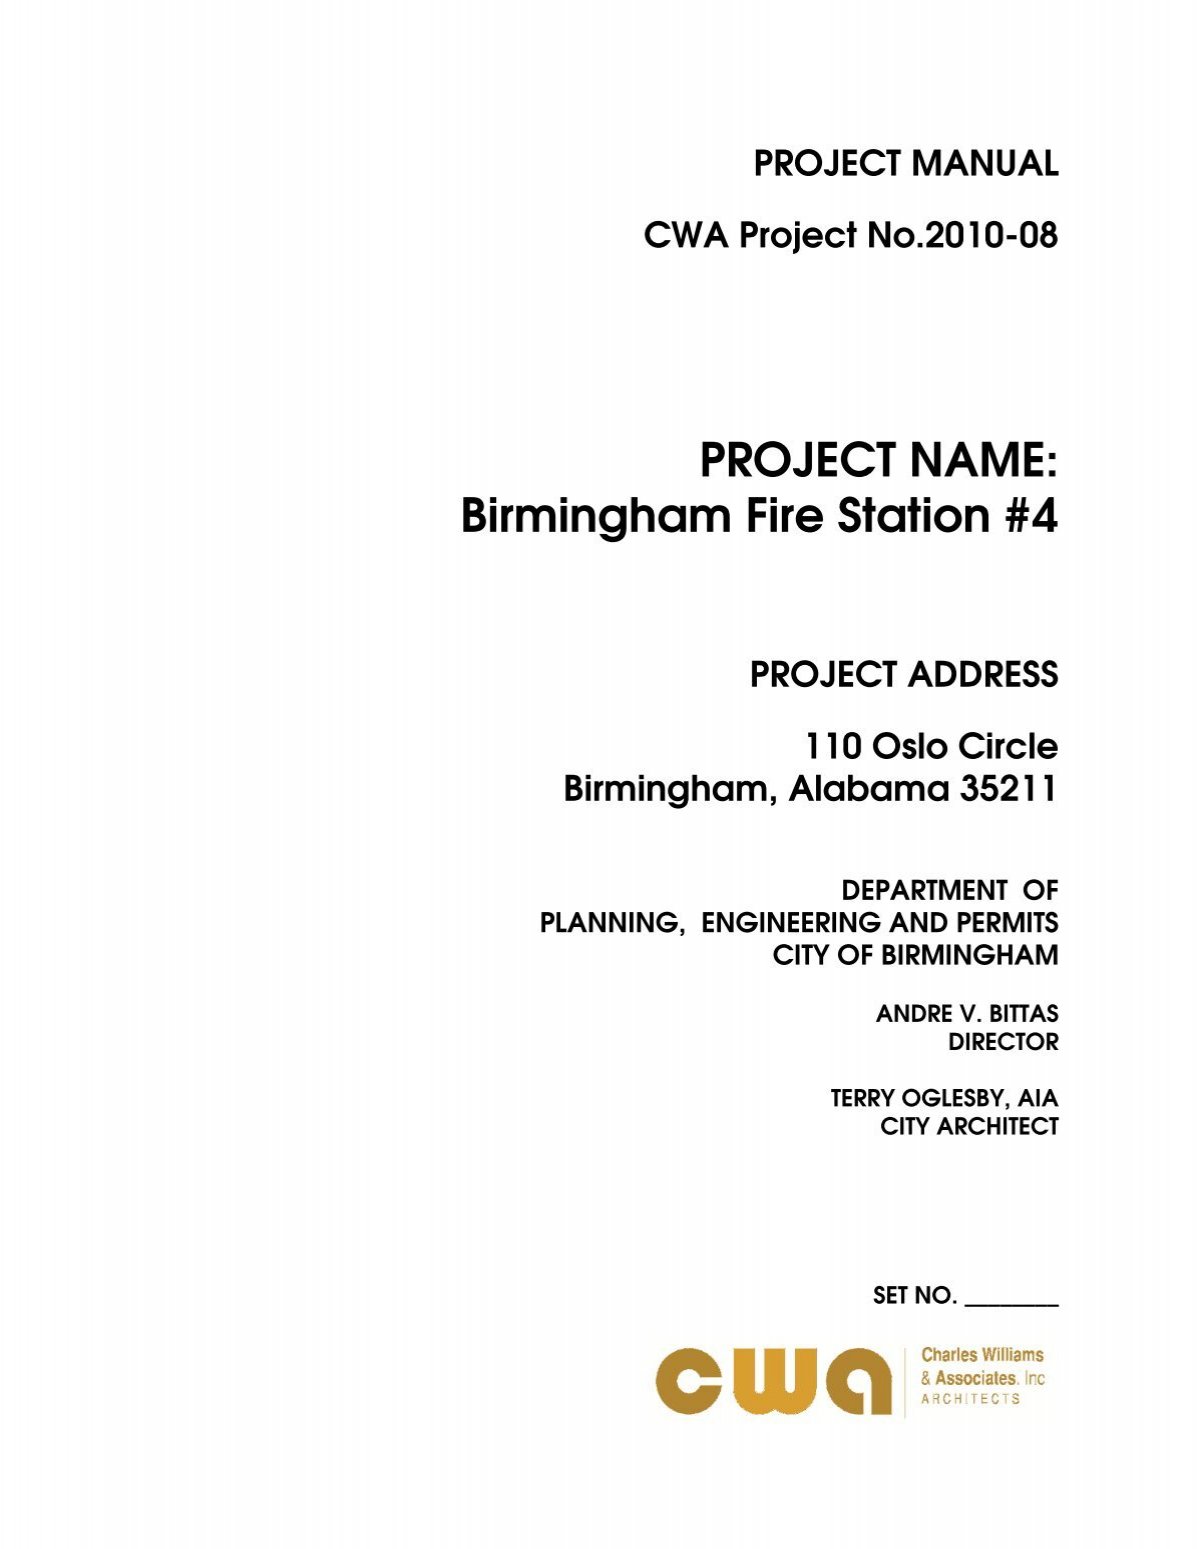 Project Name: Birmingham Fire Station #4